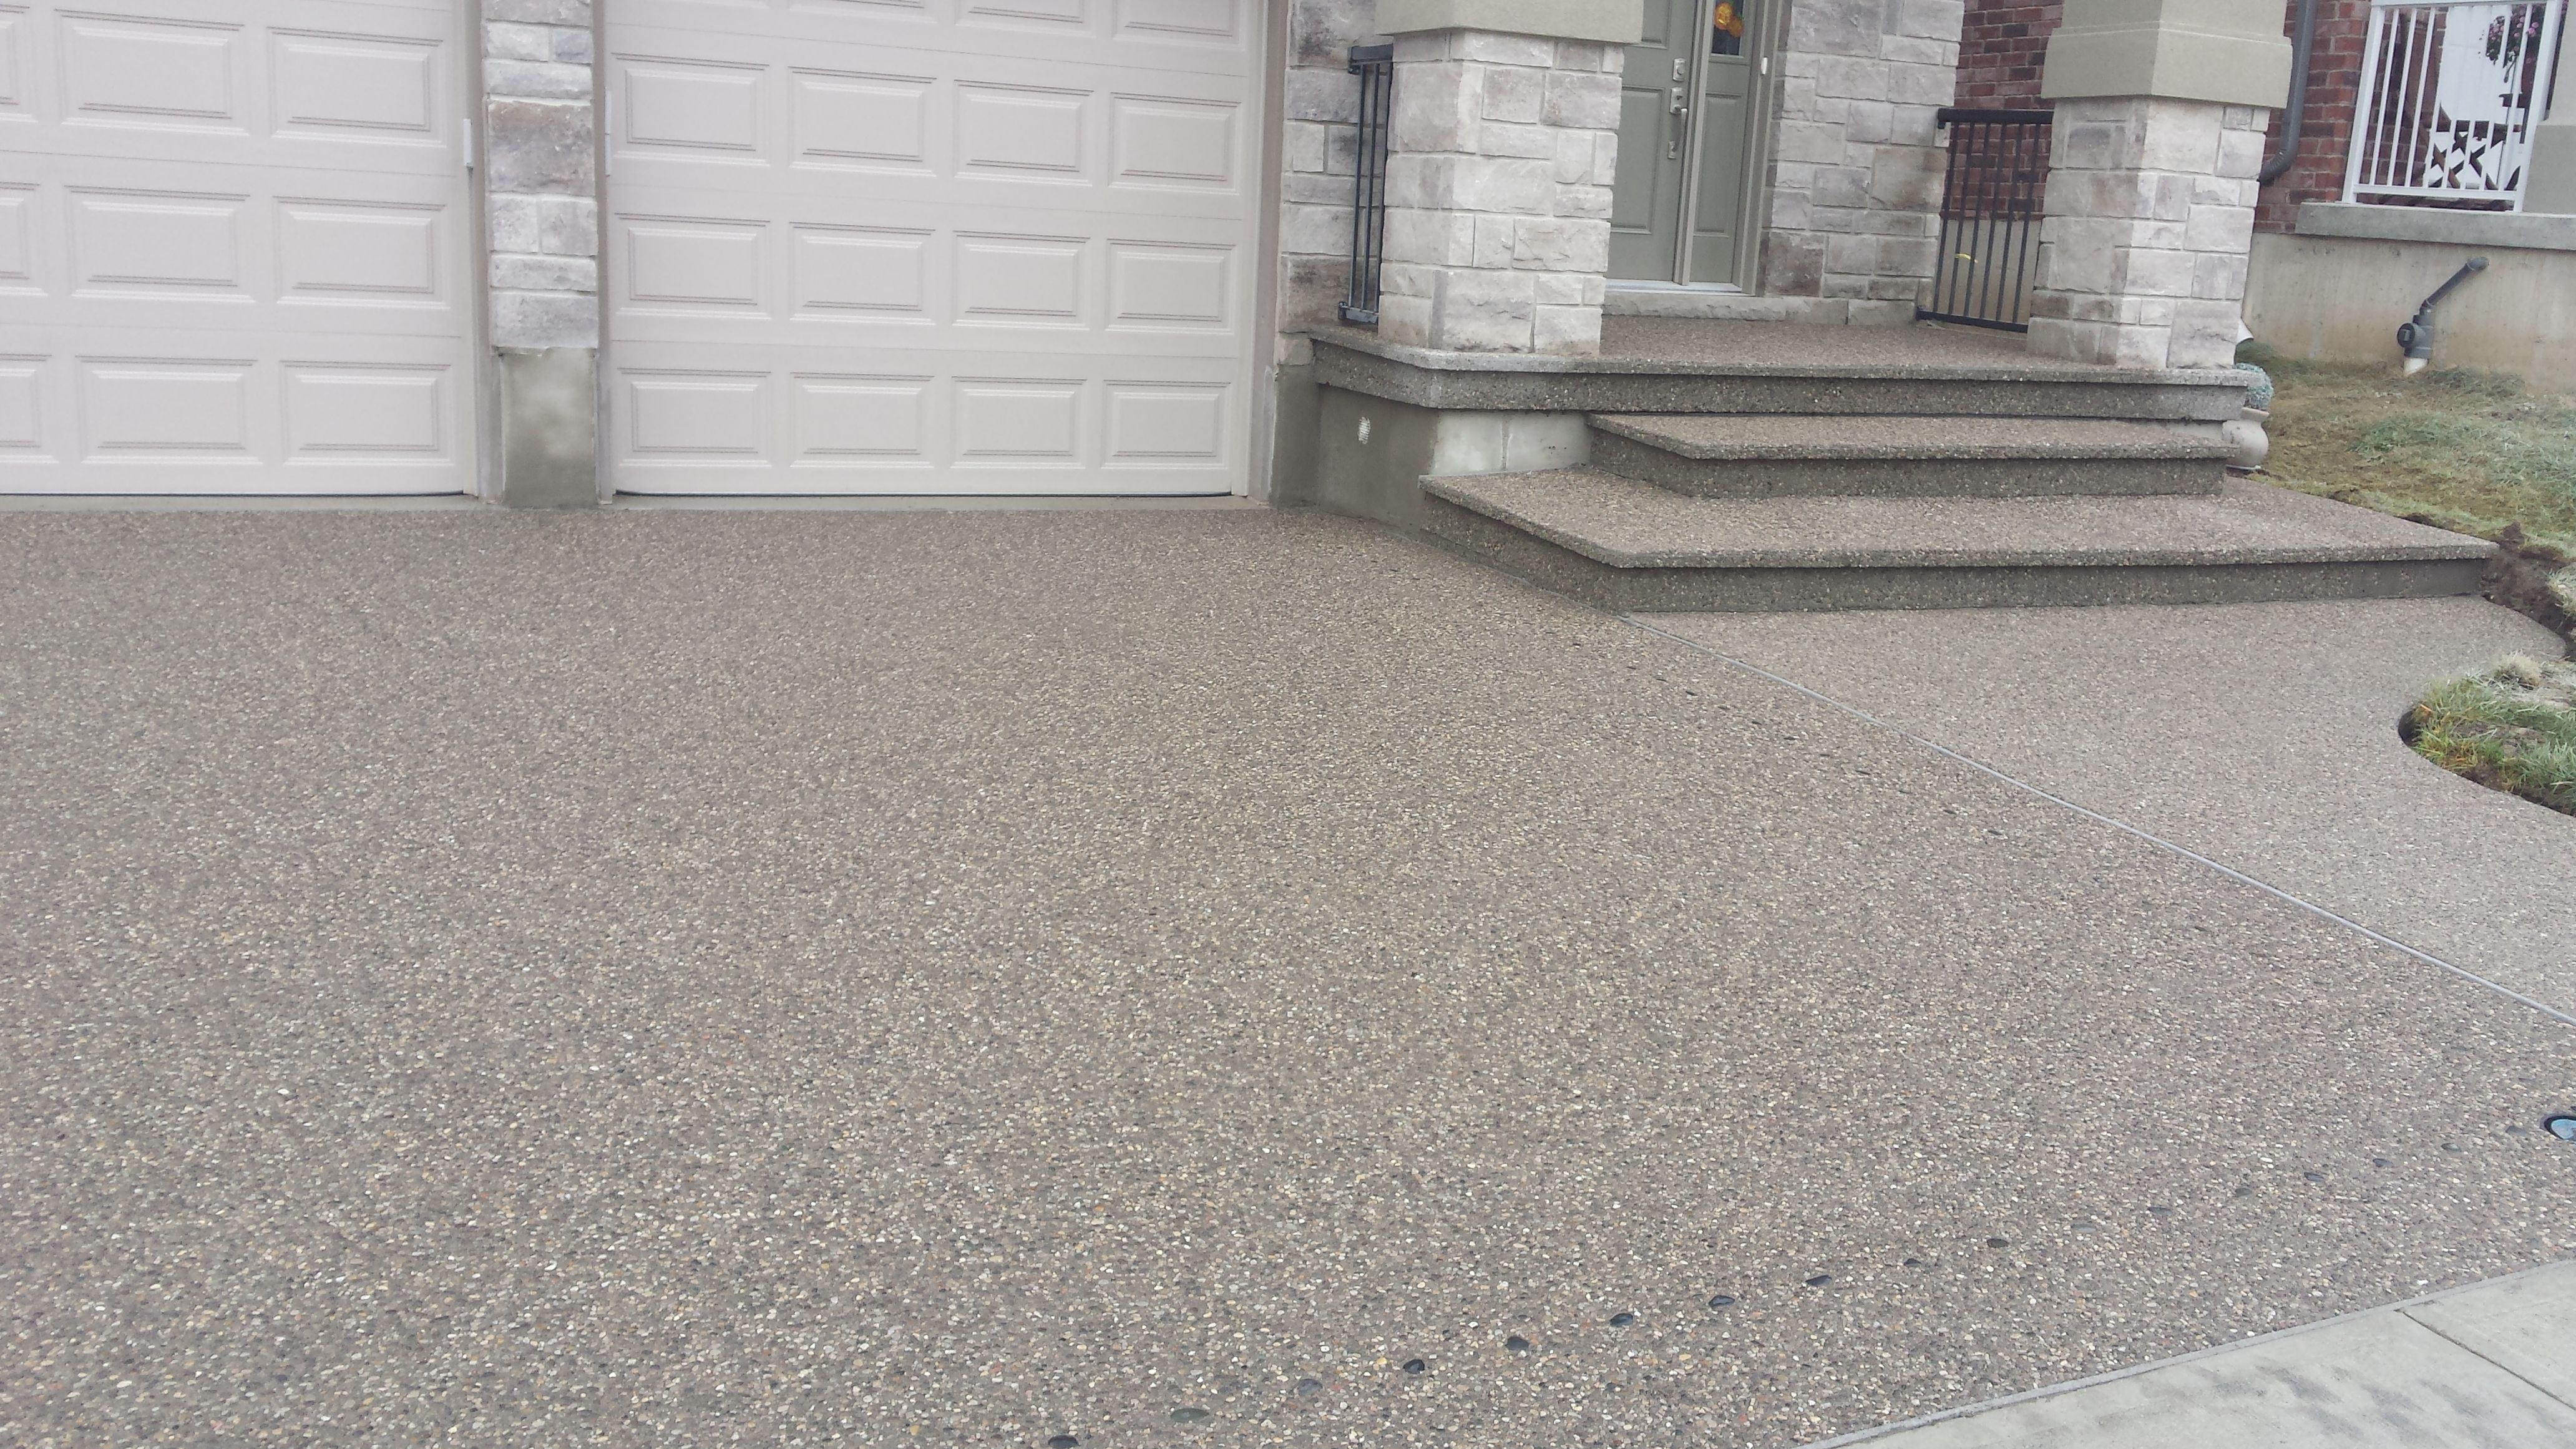 Exposed Aggregate Concrete Driveway Driveway Paving for size 4128 X 2322